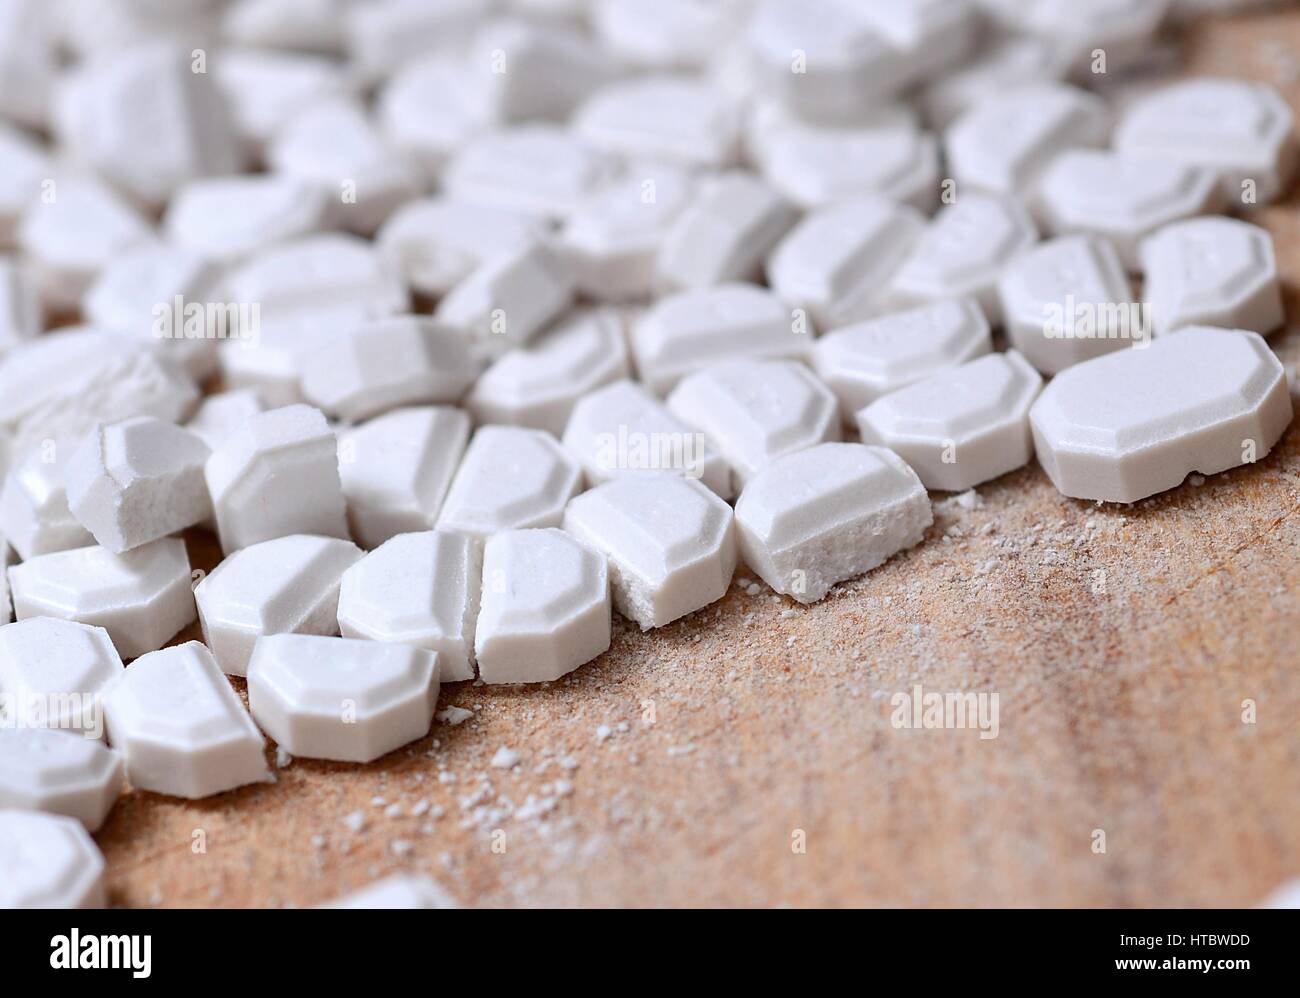 Macro of the white pills cut into pieces on wooden brown background. Stock Photo